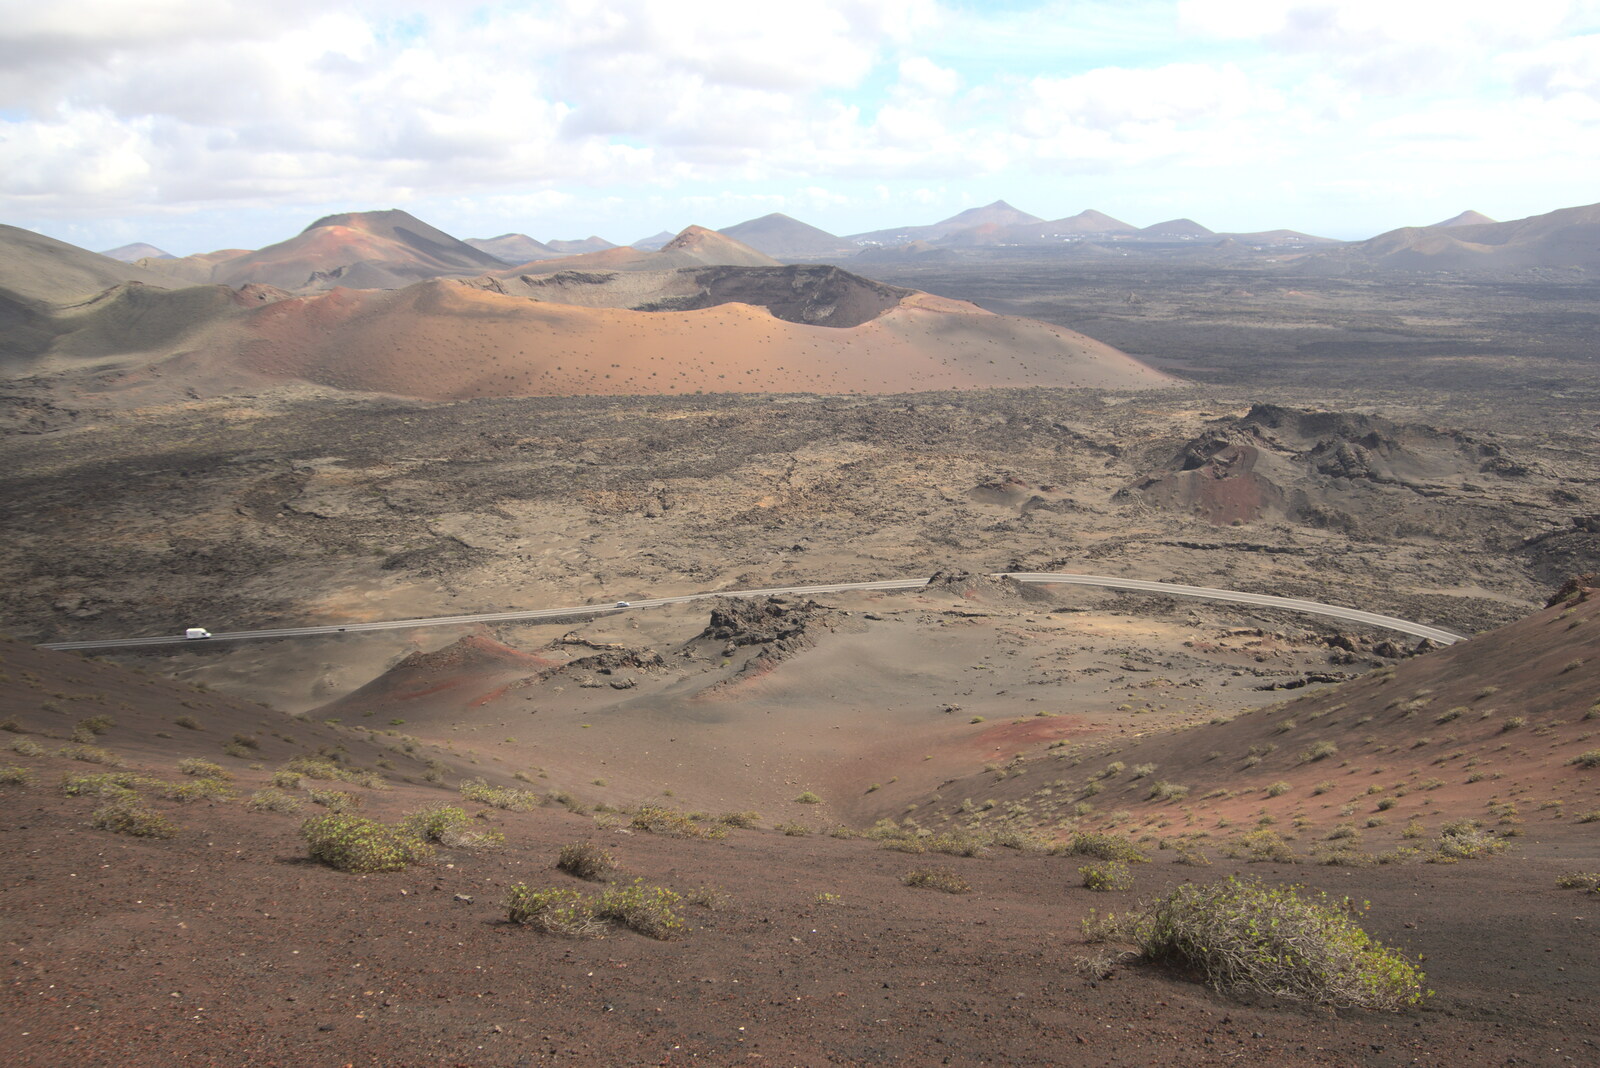 A view out over the national park from The Volcanoes of Lanzarote, Canary Islands, Spain - 27th October 2021